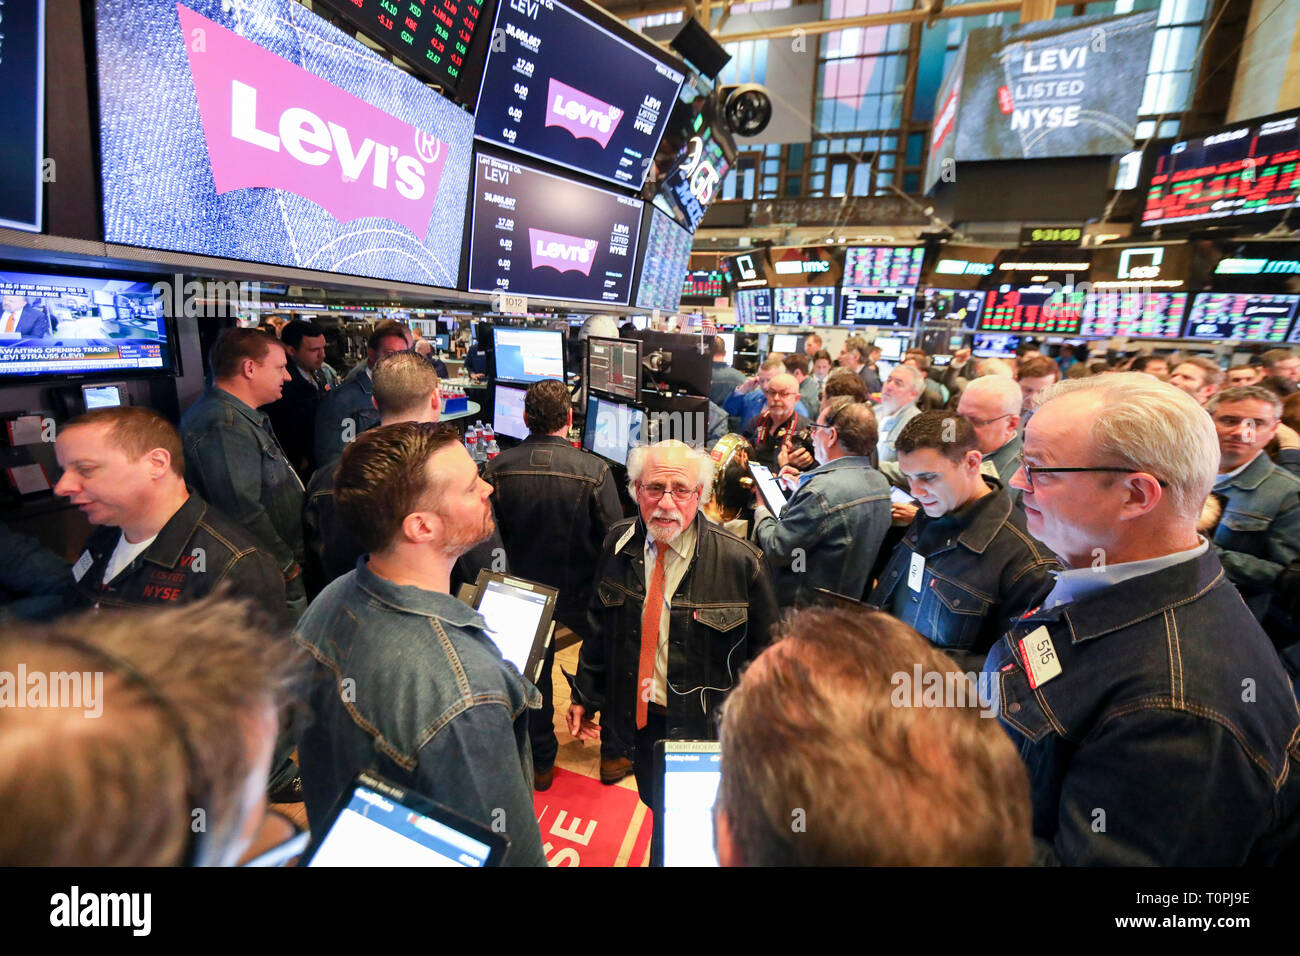 New York, USA. 21st Mar, 2019. Traders wearing denim clothing and jeans work at the New York Stock Exchange (NYSE) during the initial public offering (IPO) of Levi Strauss & Co., in New York, the United States, March 21, 2019. Blue jeans giant Levi Strauss & Co. began trading on the NYSE on Thursday. The 166-year-old company first went public in 1971, but has been private for the last 34 years. Credit: Wang Ying/Xinhua/Alamy Live News Stock Photo